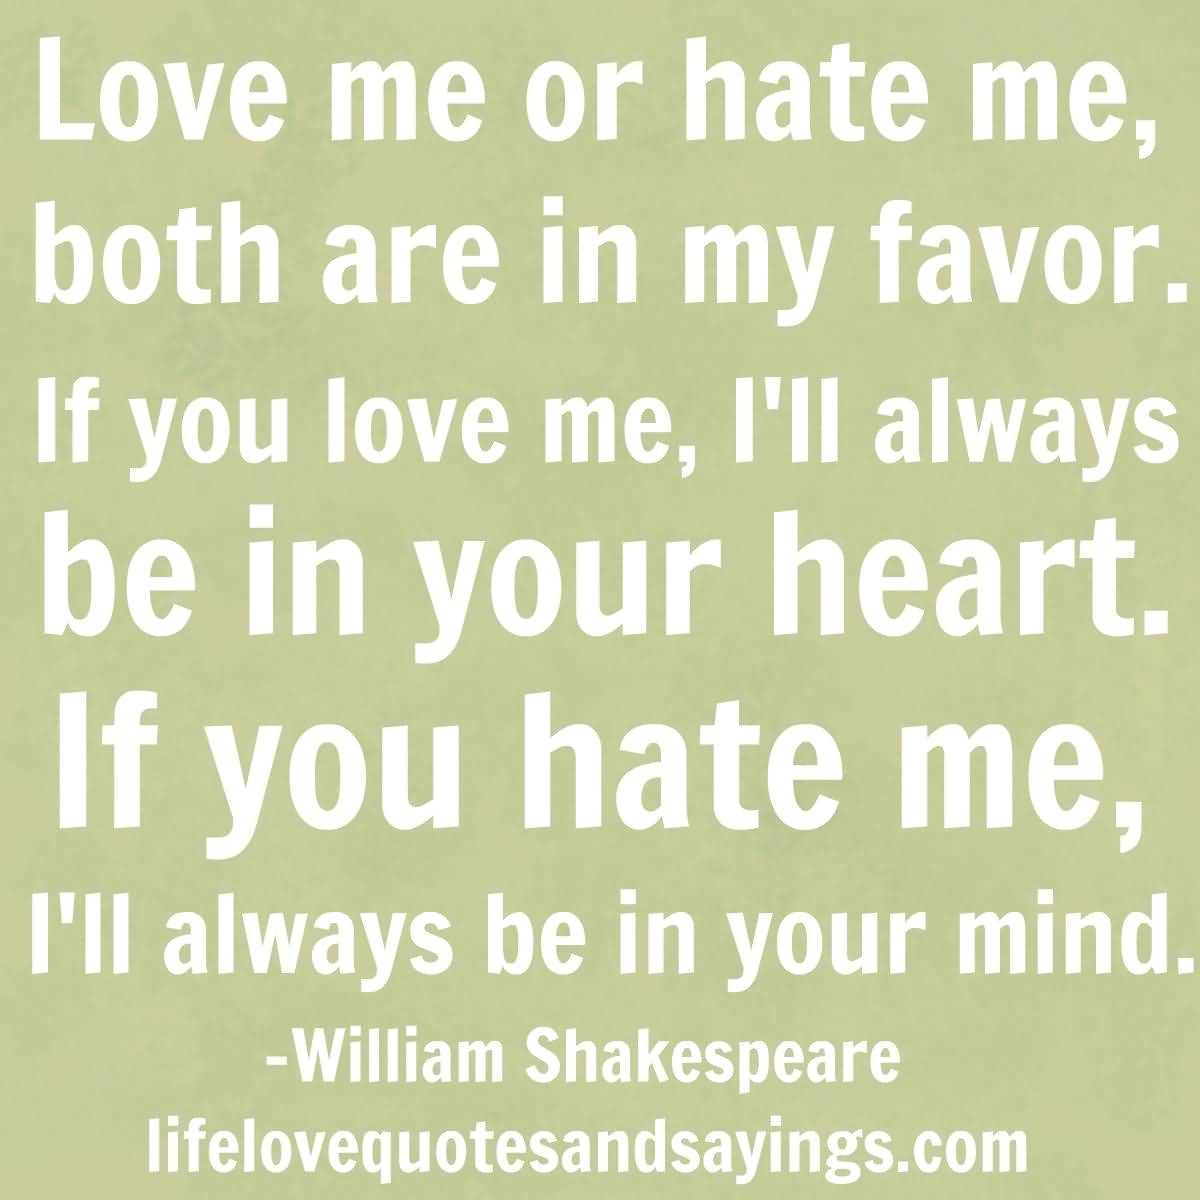 Love me or hate me, both are in my favor…If you love me, I’ll always be in your heart…If you hate me, I’ll always be in your mind.